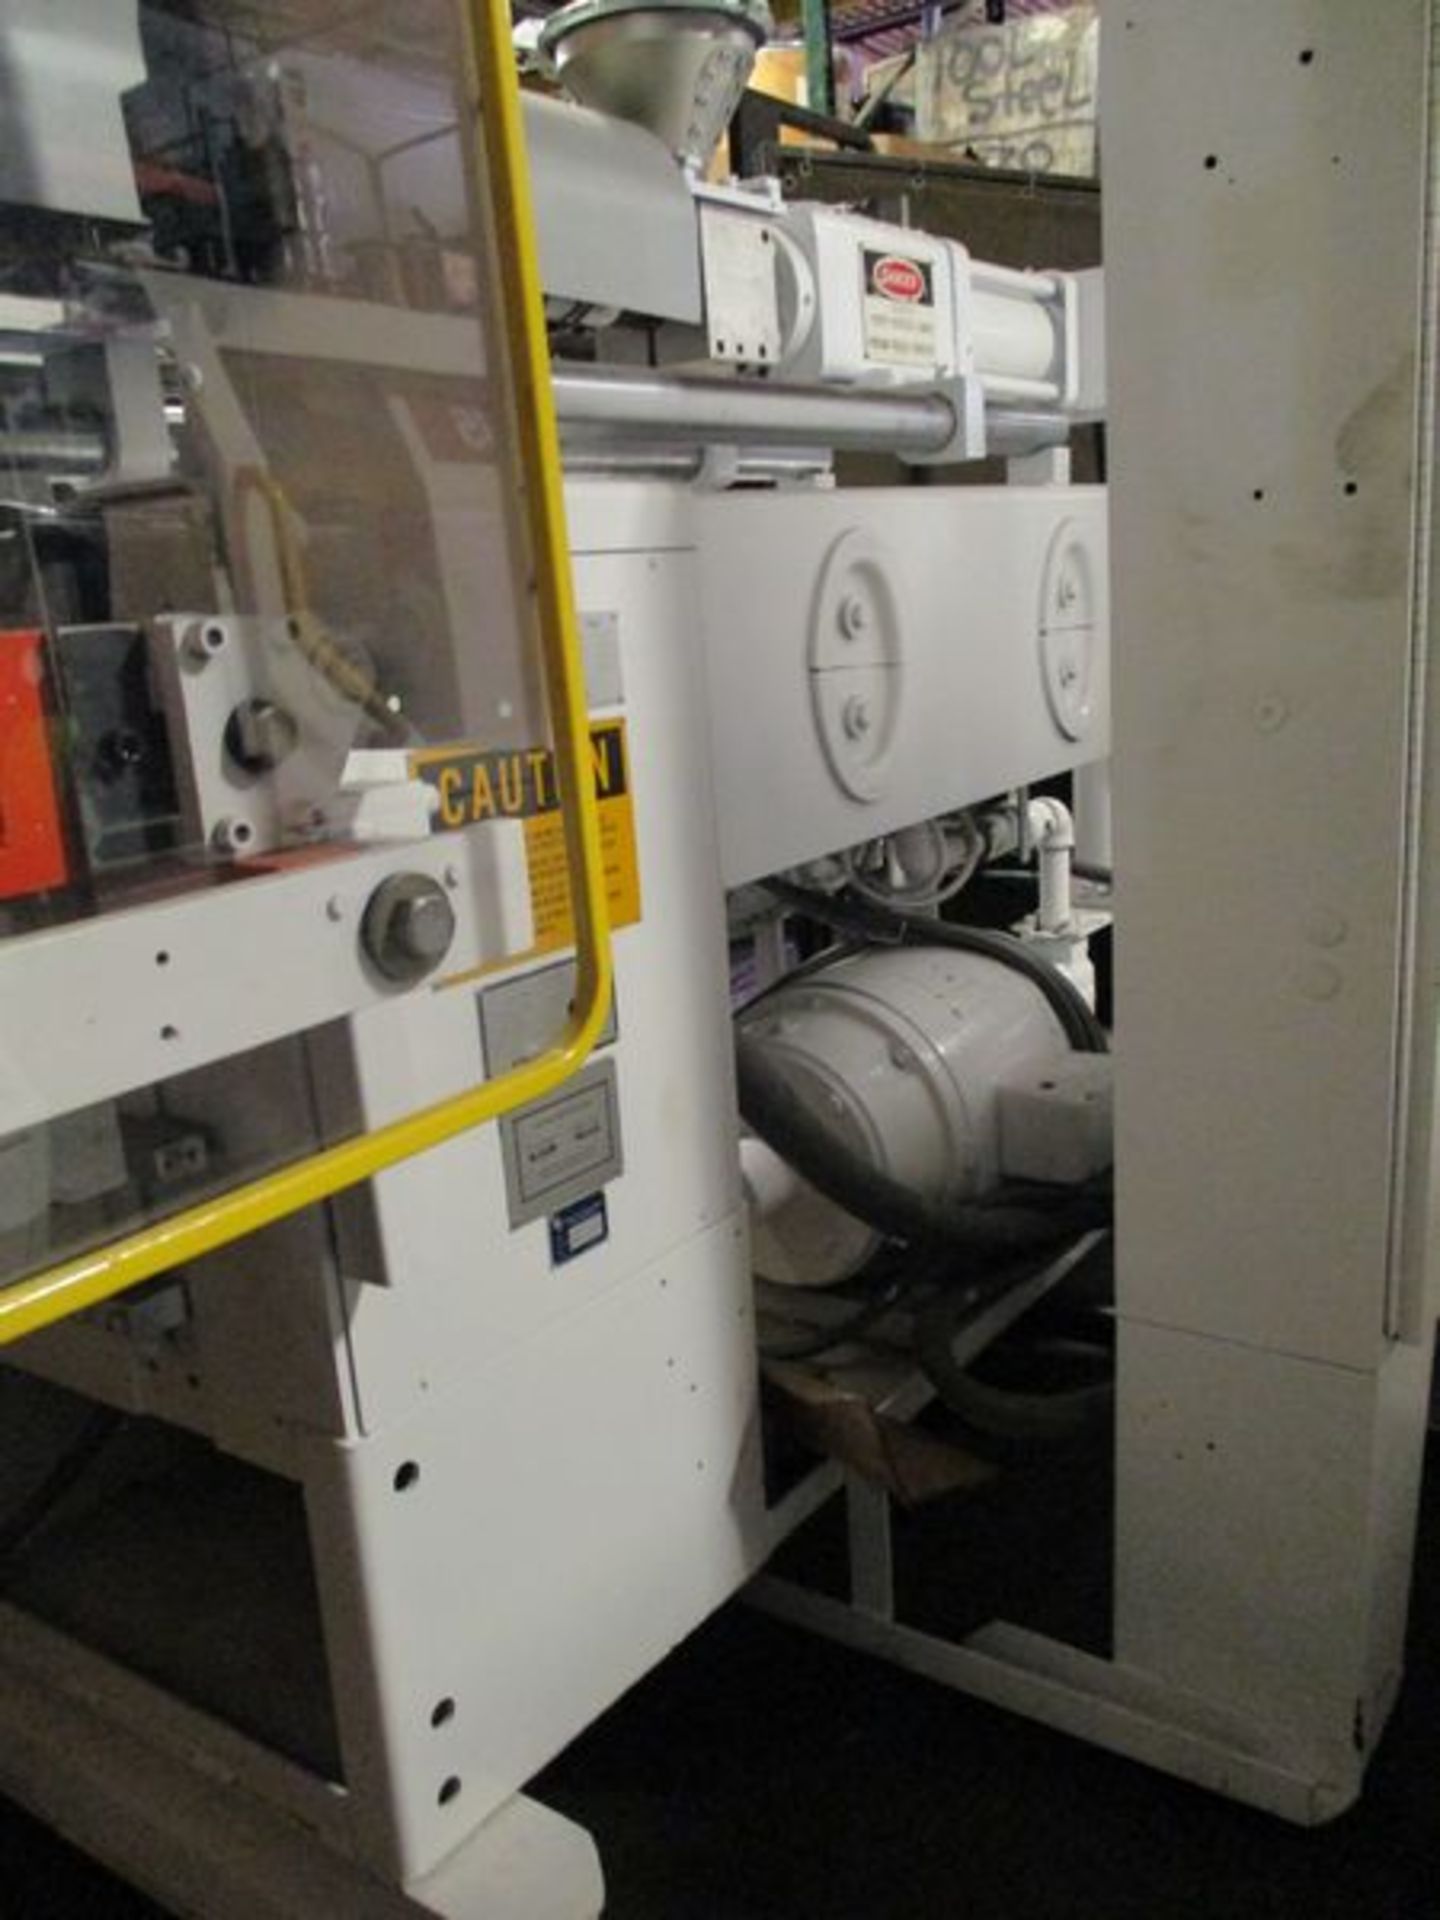 Ingersoll Rand Impco B13 Extrusion Blow Molder - Sterling Heights, MI - Image 11 of 12